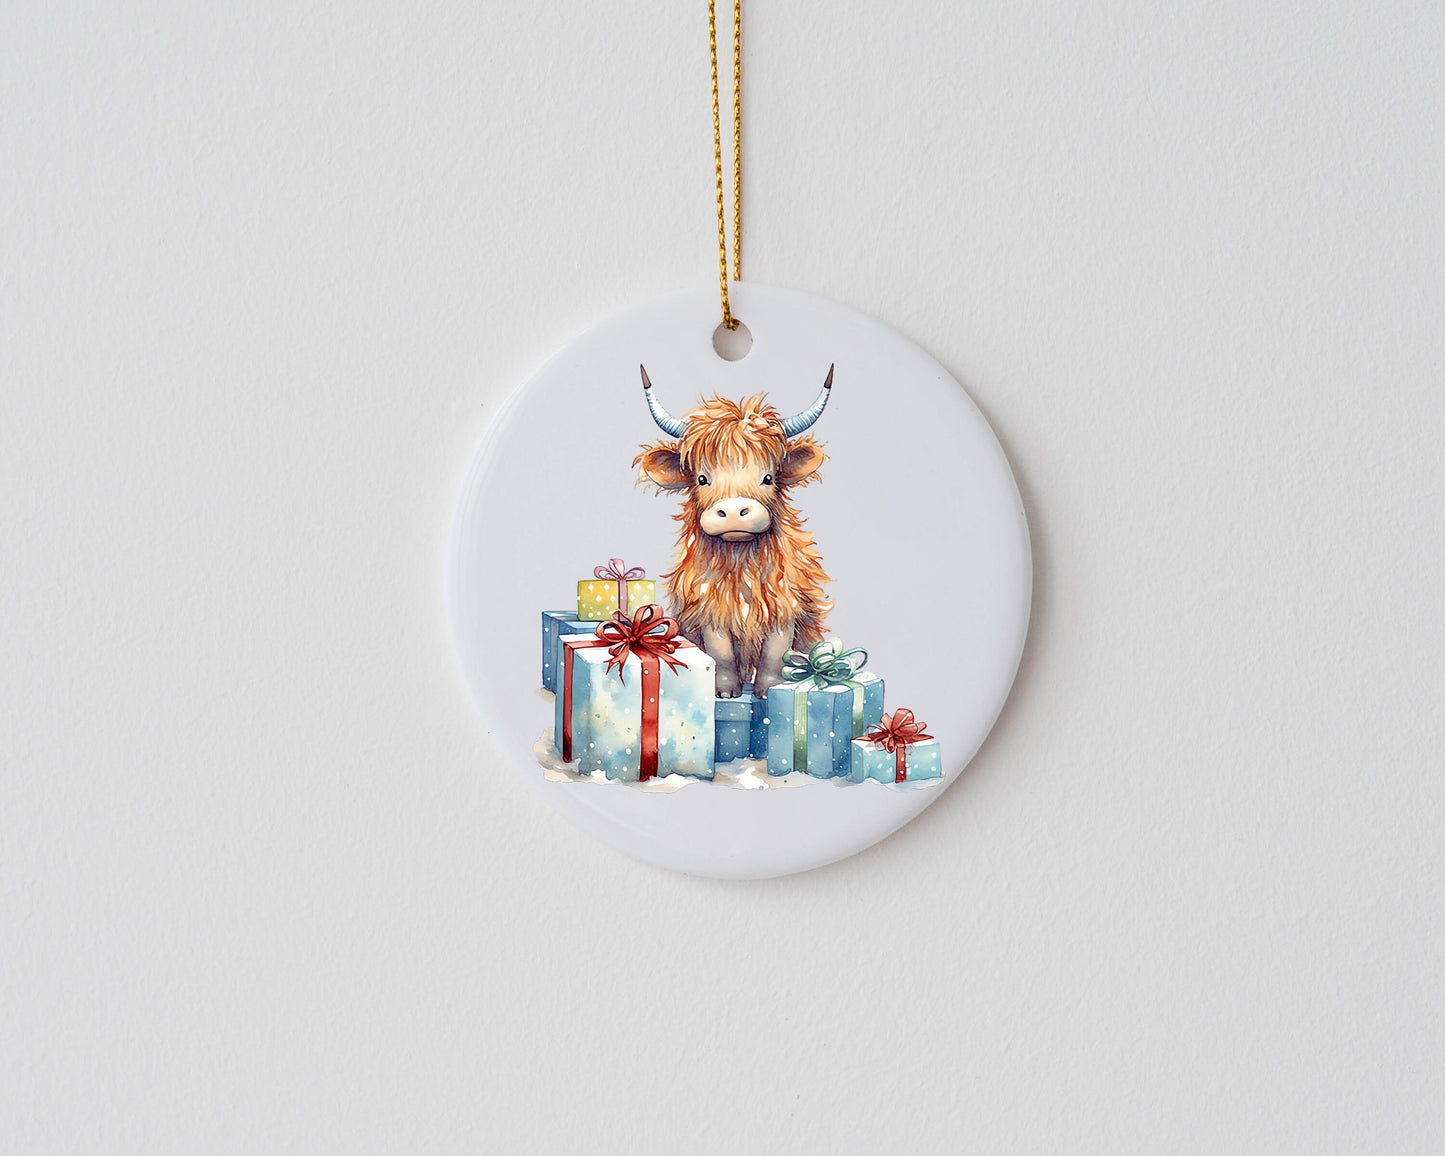 New Release Christmas Ornament, Highland Cow and Presents Ceramic Christmas Ornament